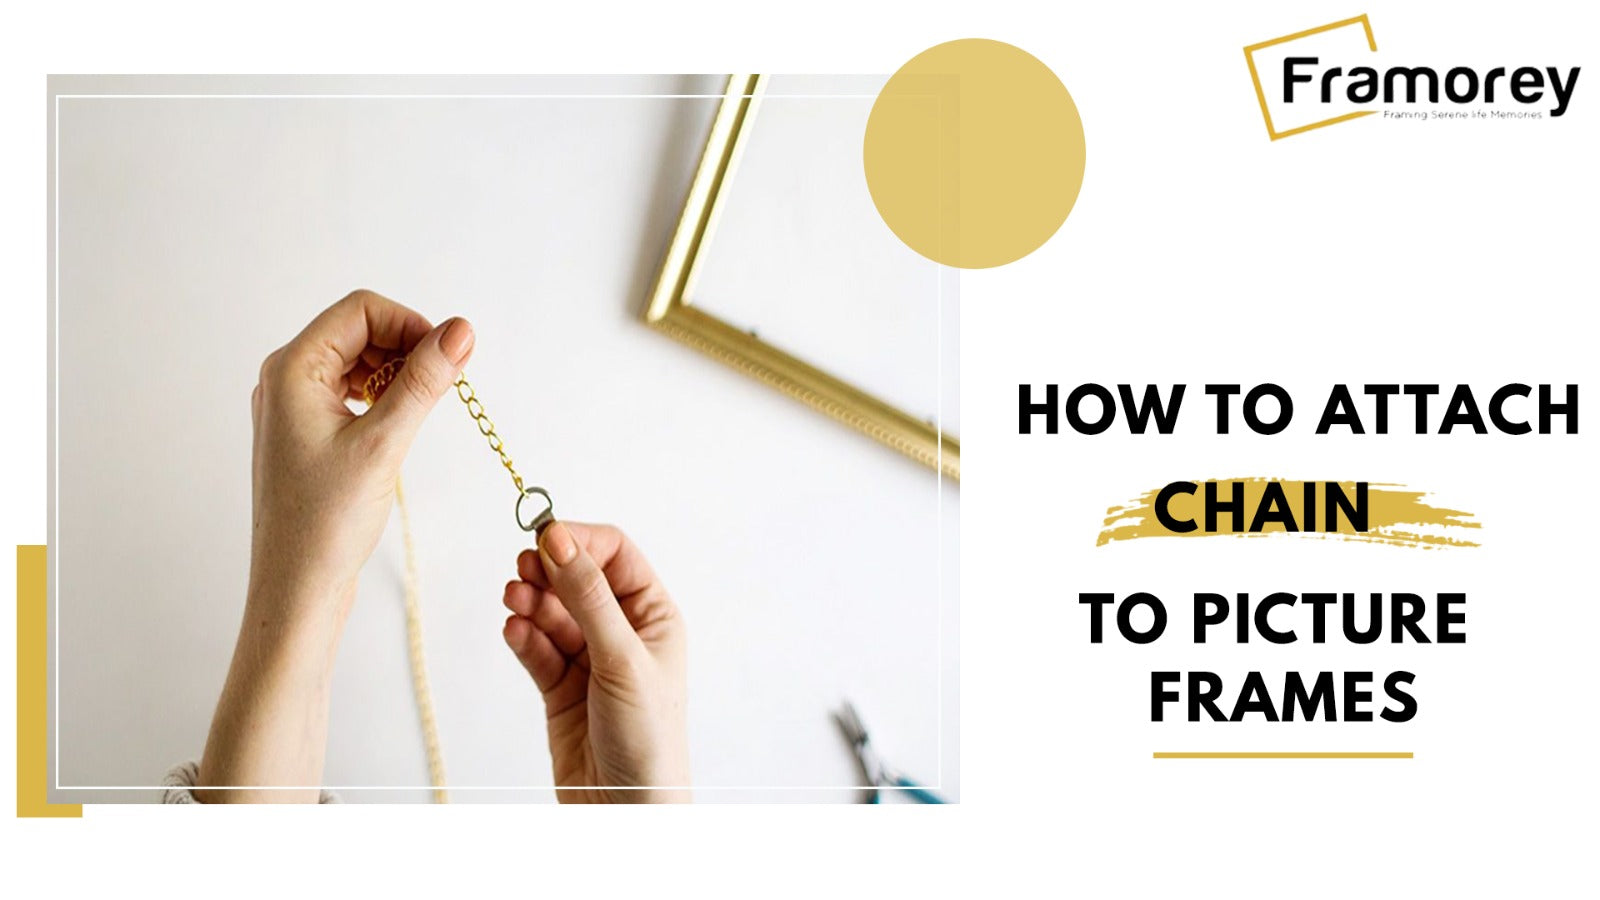 How to Attach a Chain to a Picture Frame?